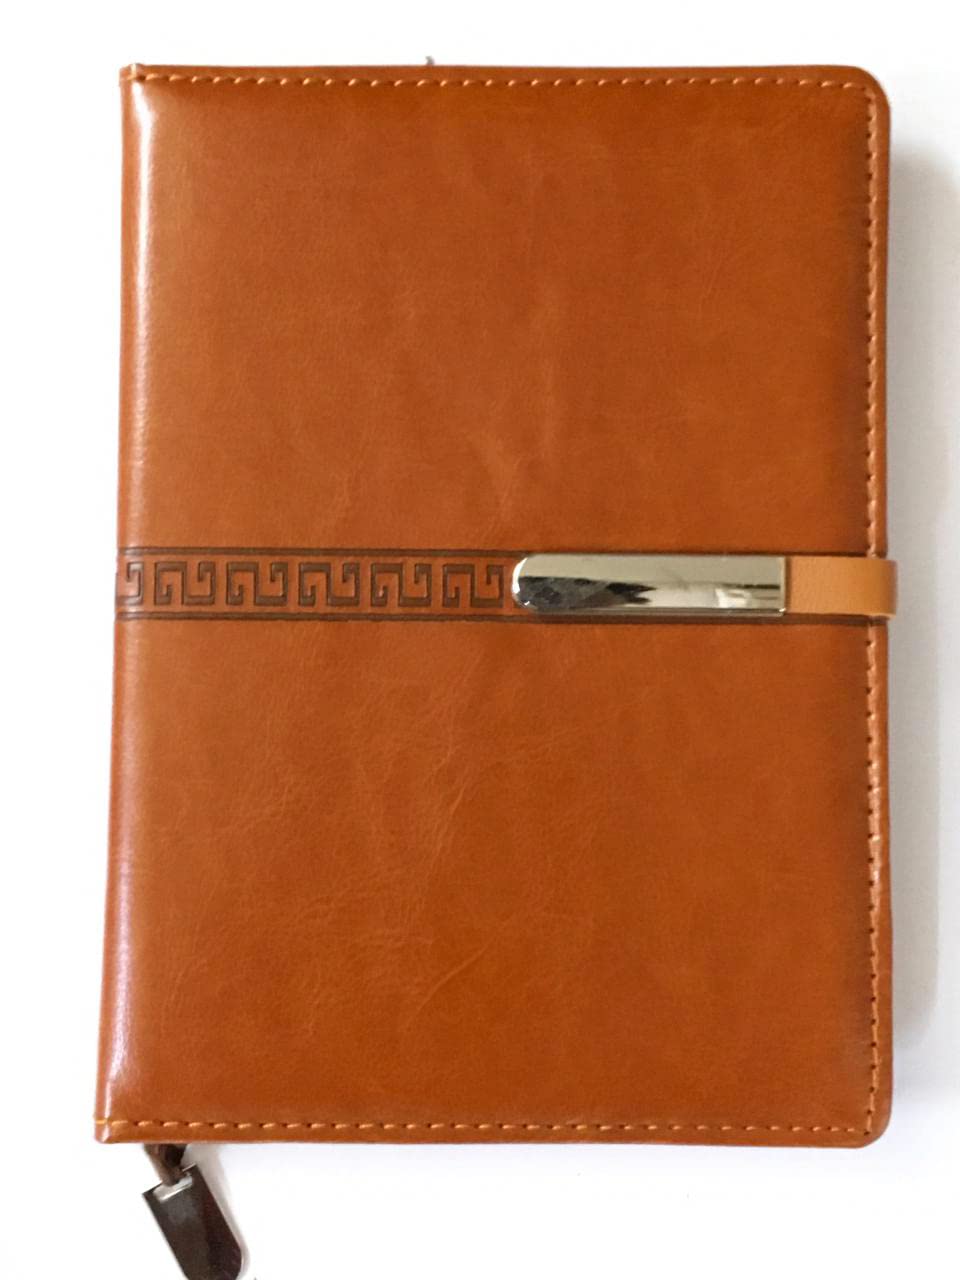 AccuPrints Brown Hard Bound A5 or 5.8 * 8.3 inches Notebook Diary with Magnate Lock